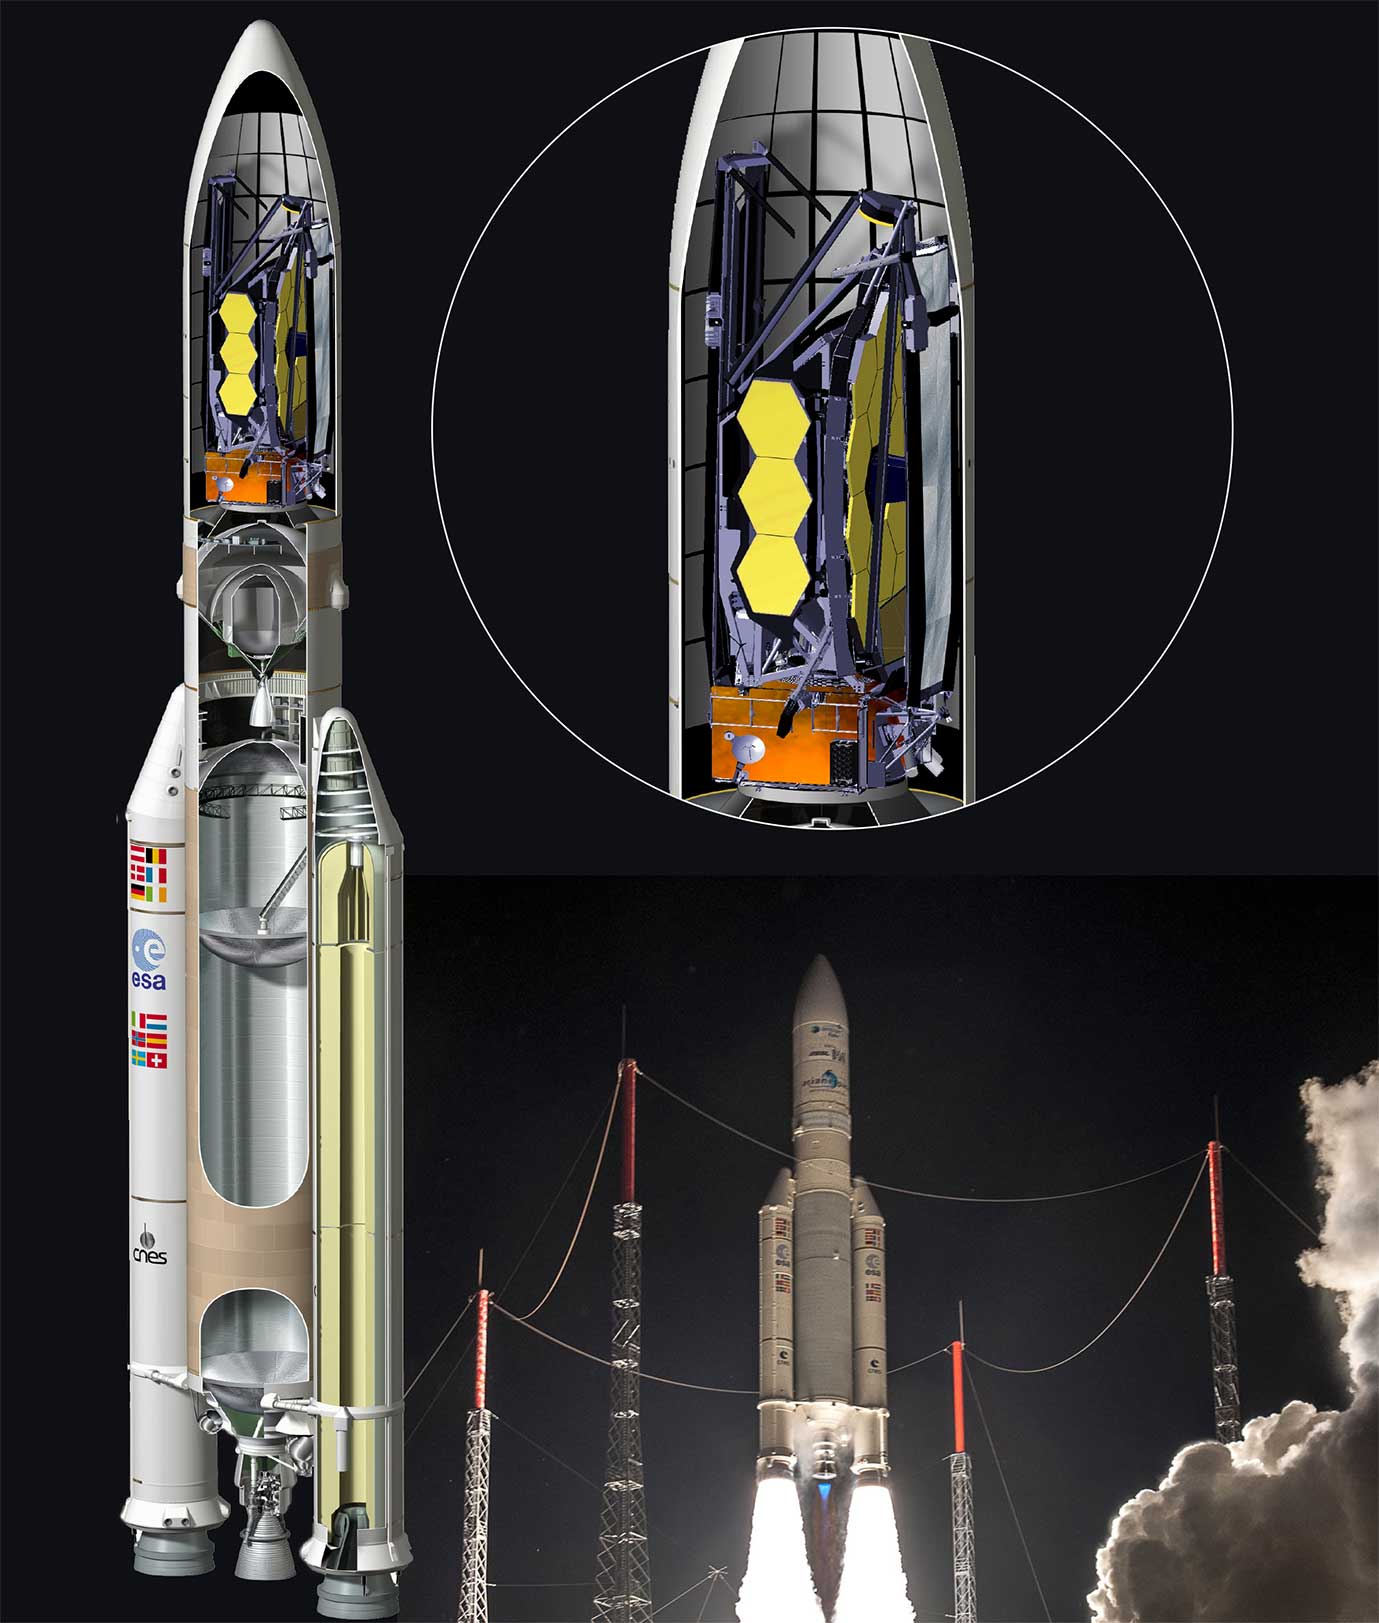 Montage or Webb (JWST) in it's folded and stowed launch configuration inside the nose cone of an Ariane 5 rocket.